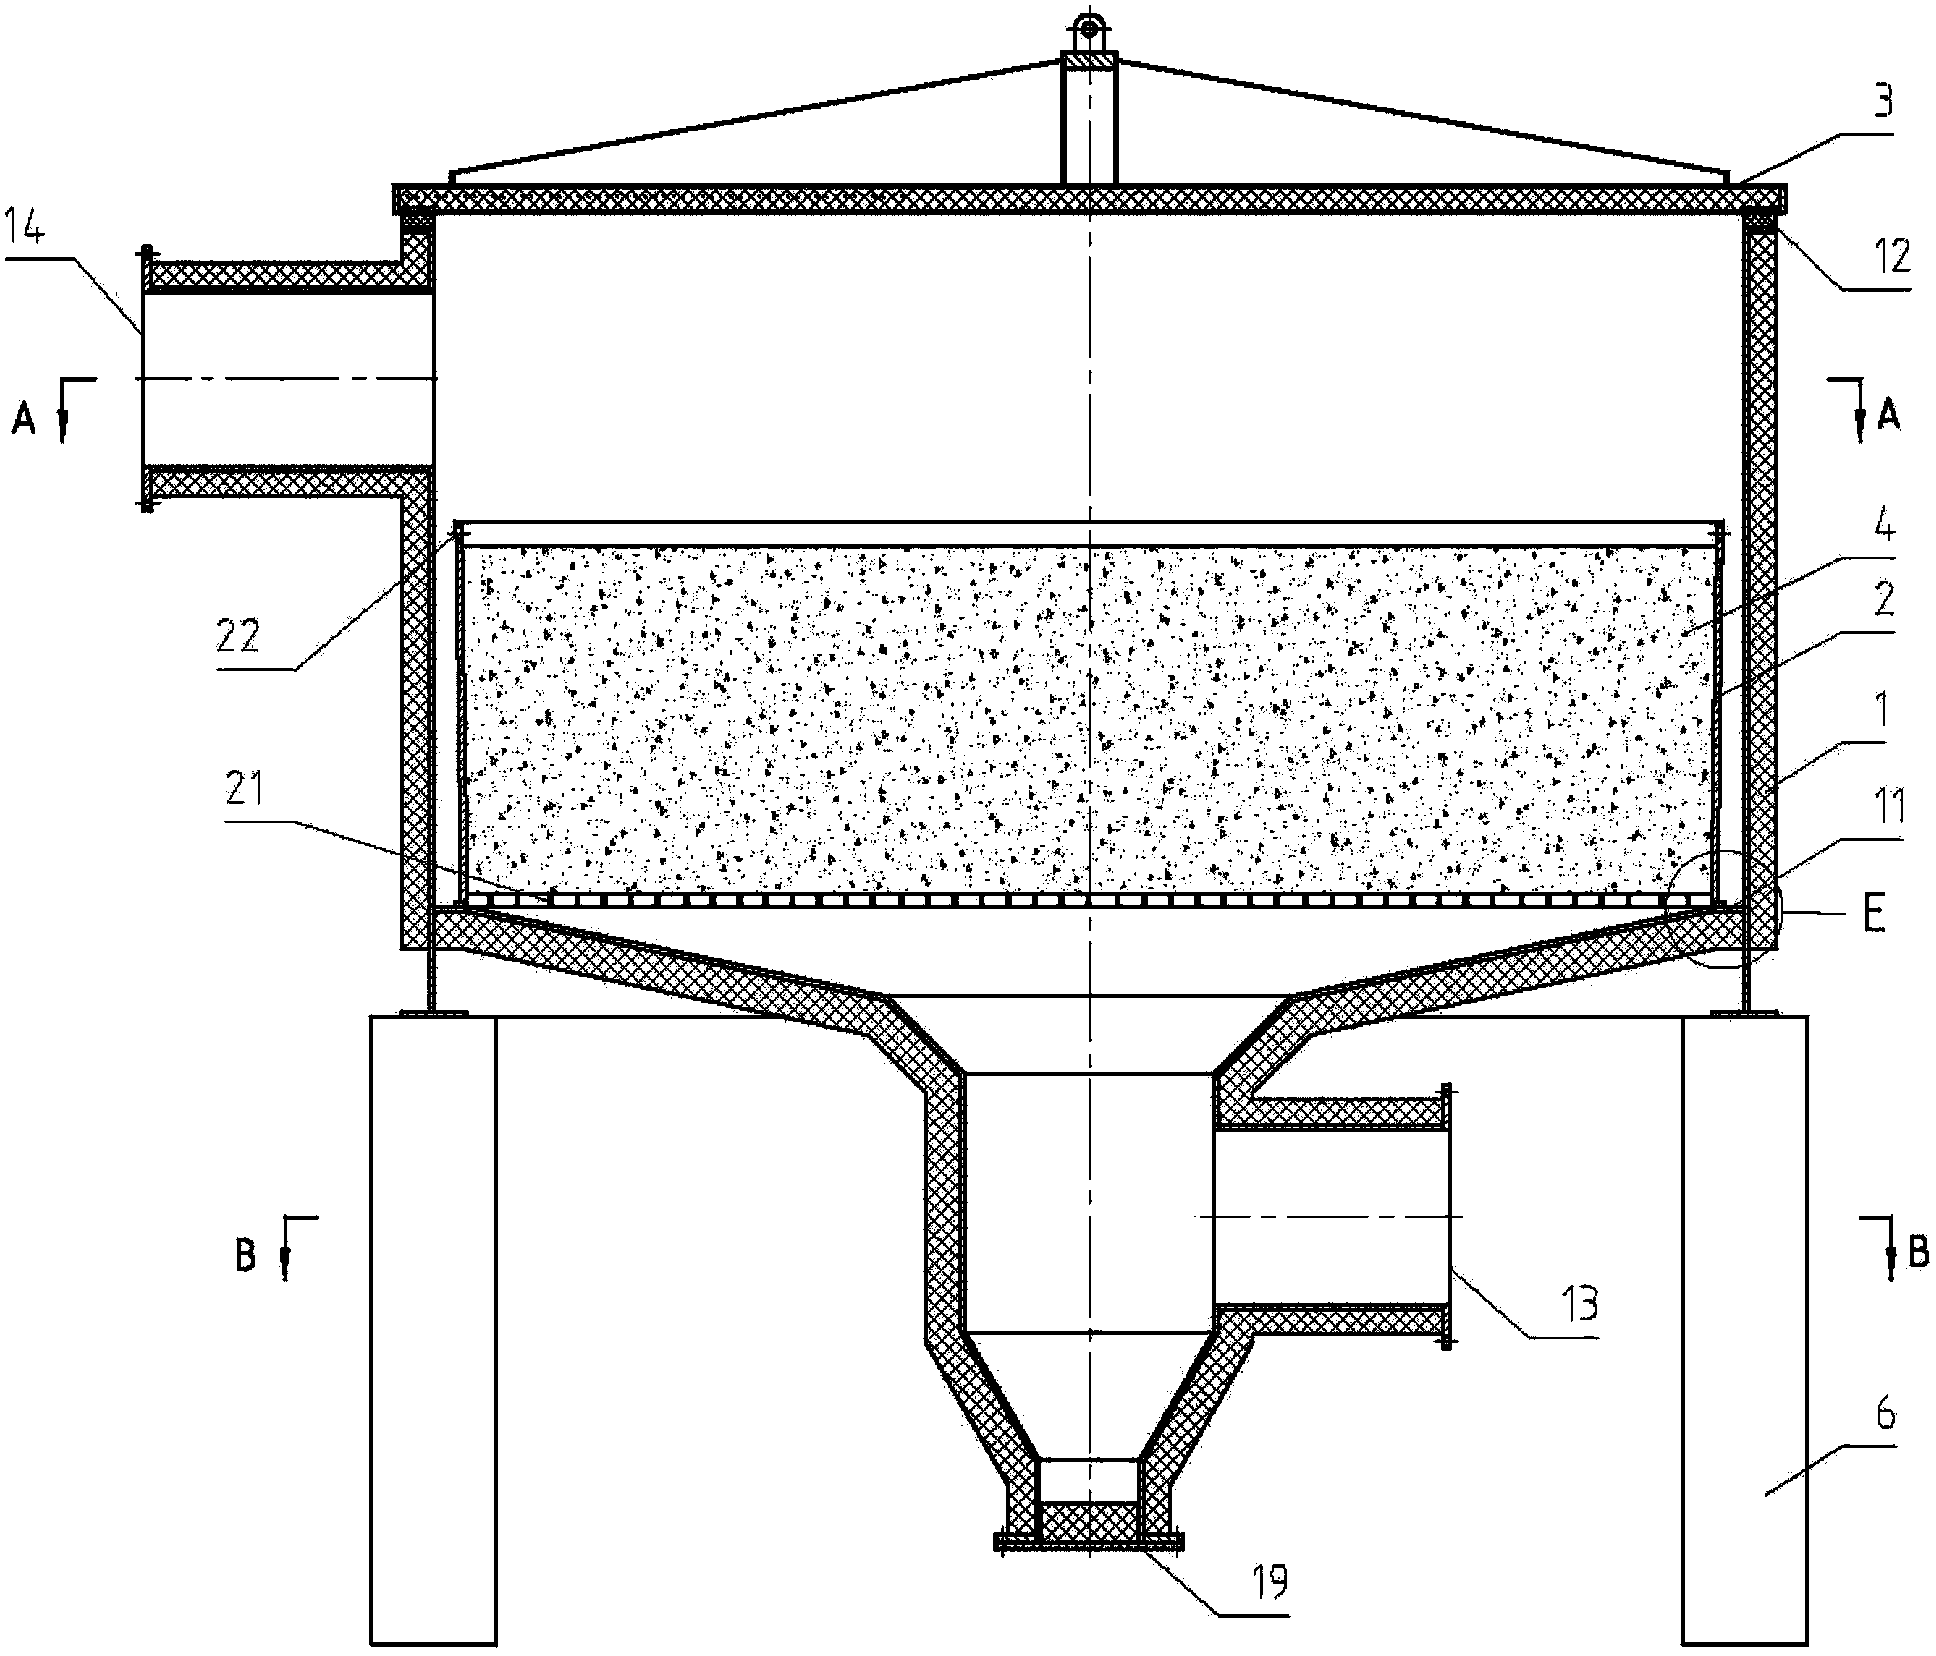 Heating furnace with double furnace bodies